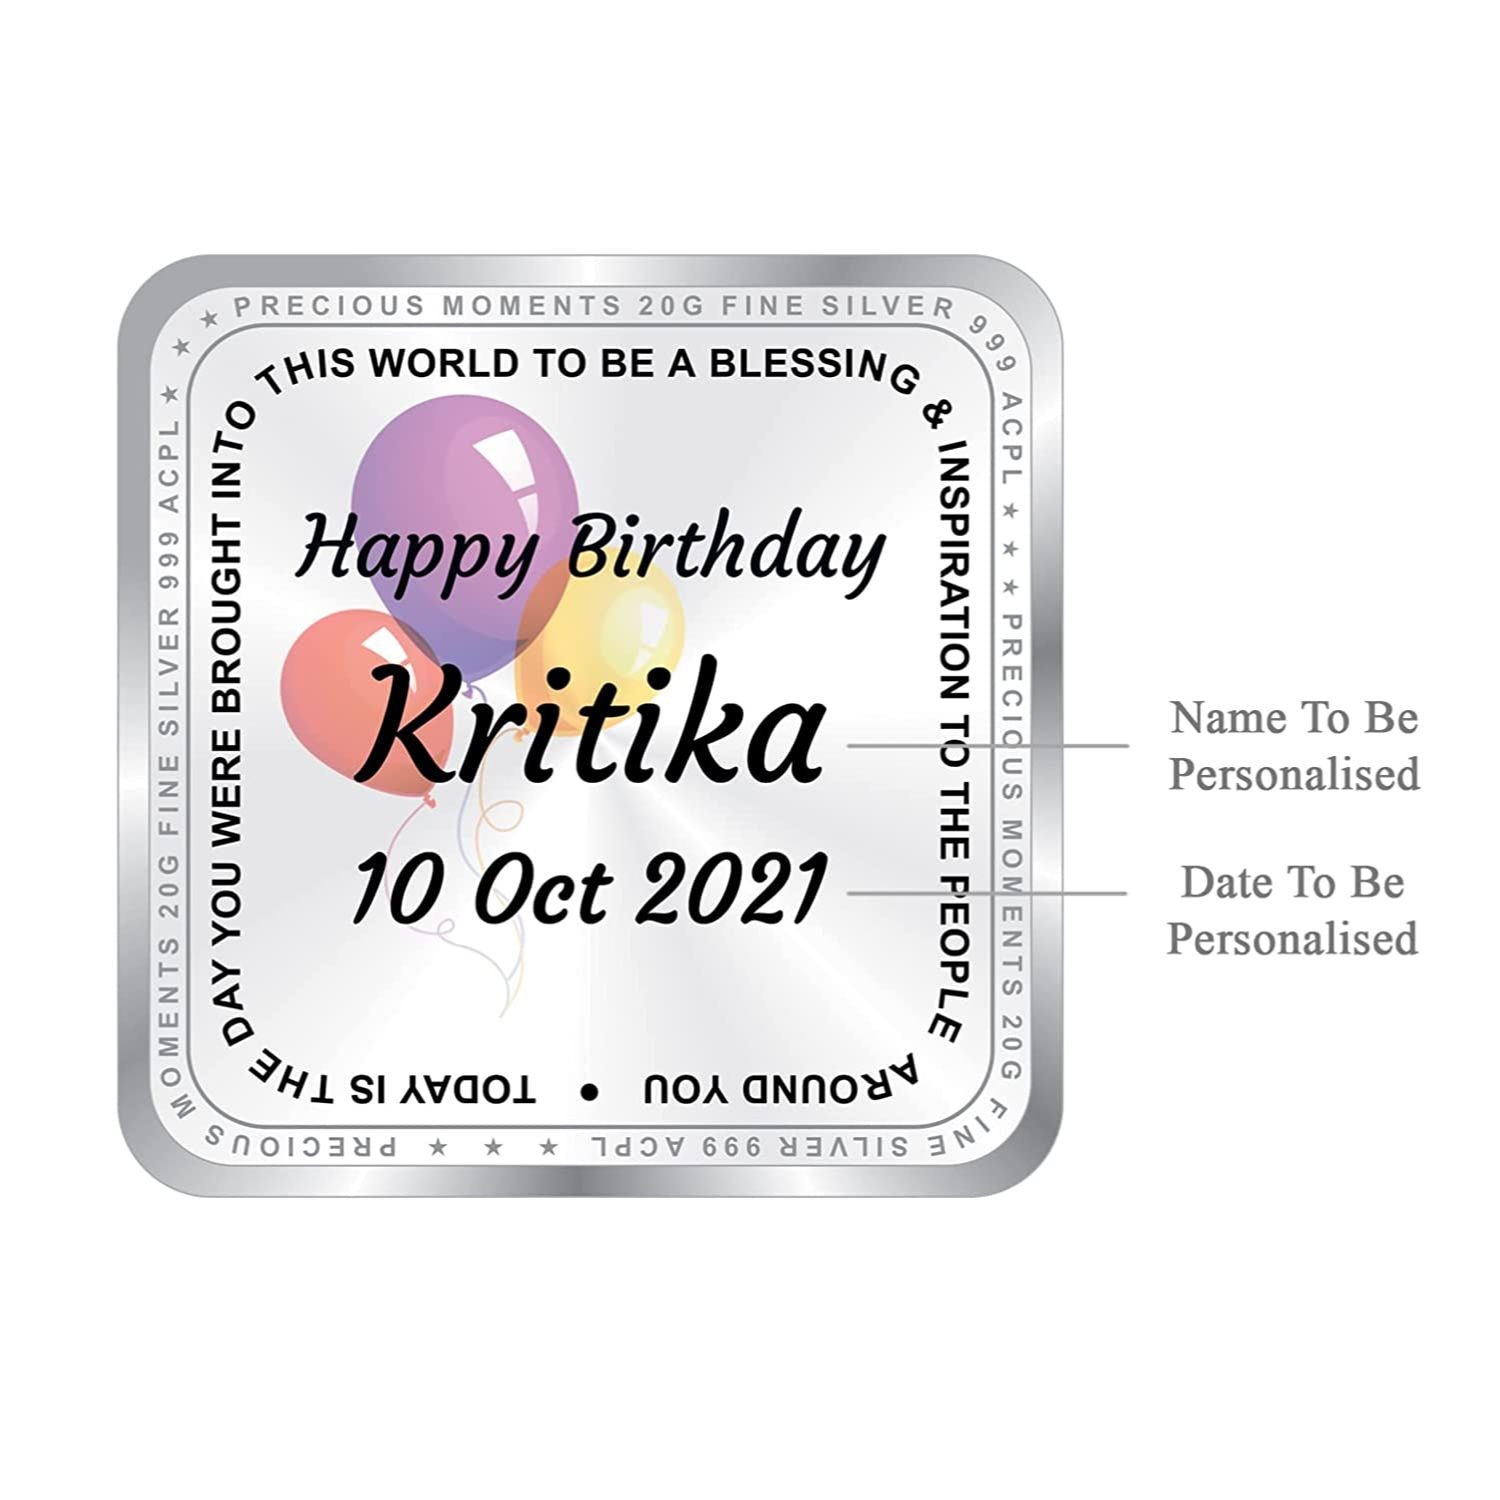 BIS Hallmarked Personalised Happy Birthday Silver Square Coin 20 Gram 999 Pure